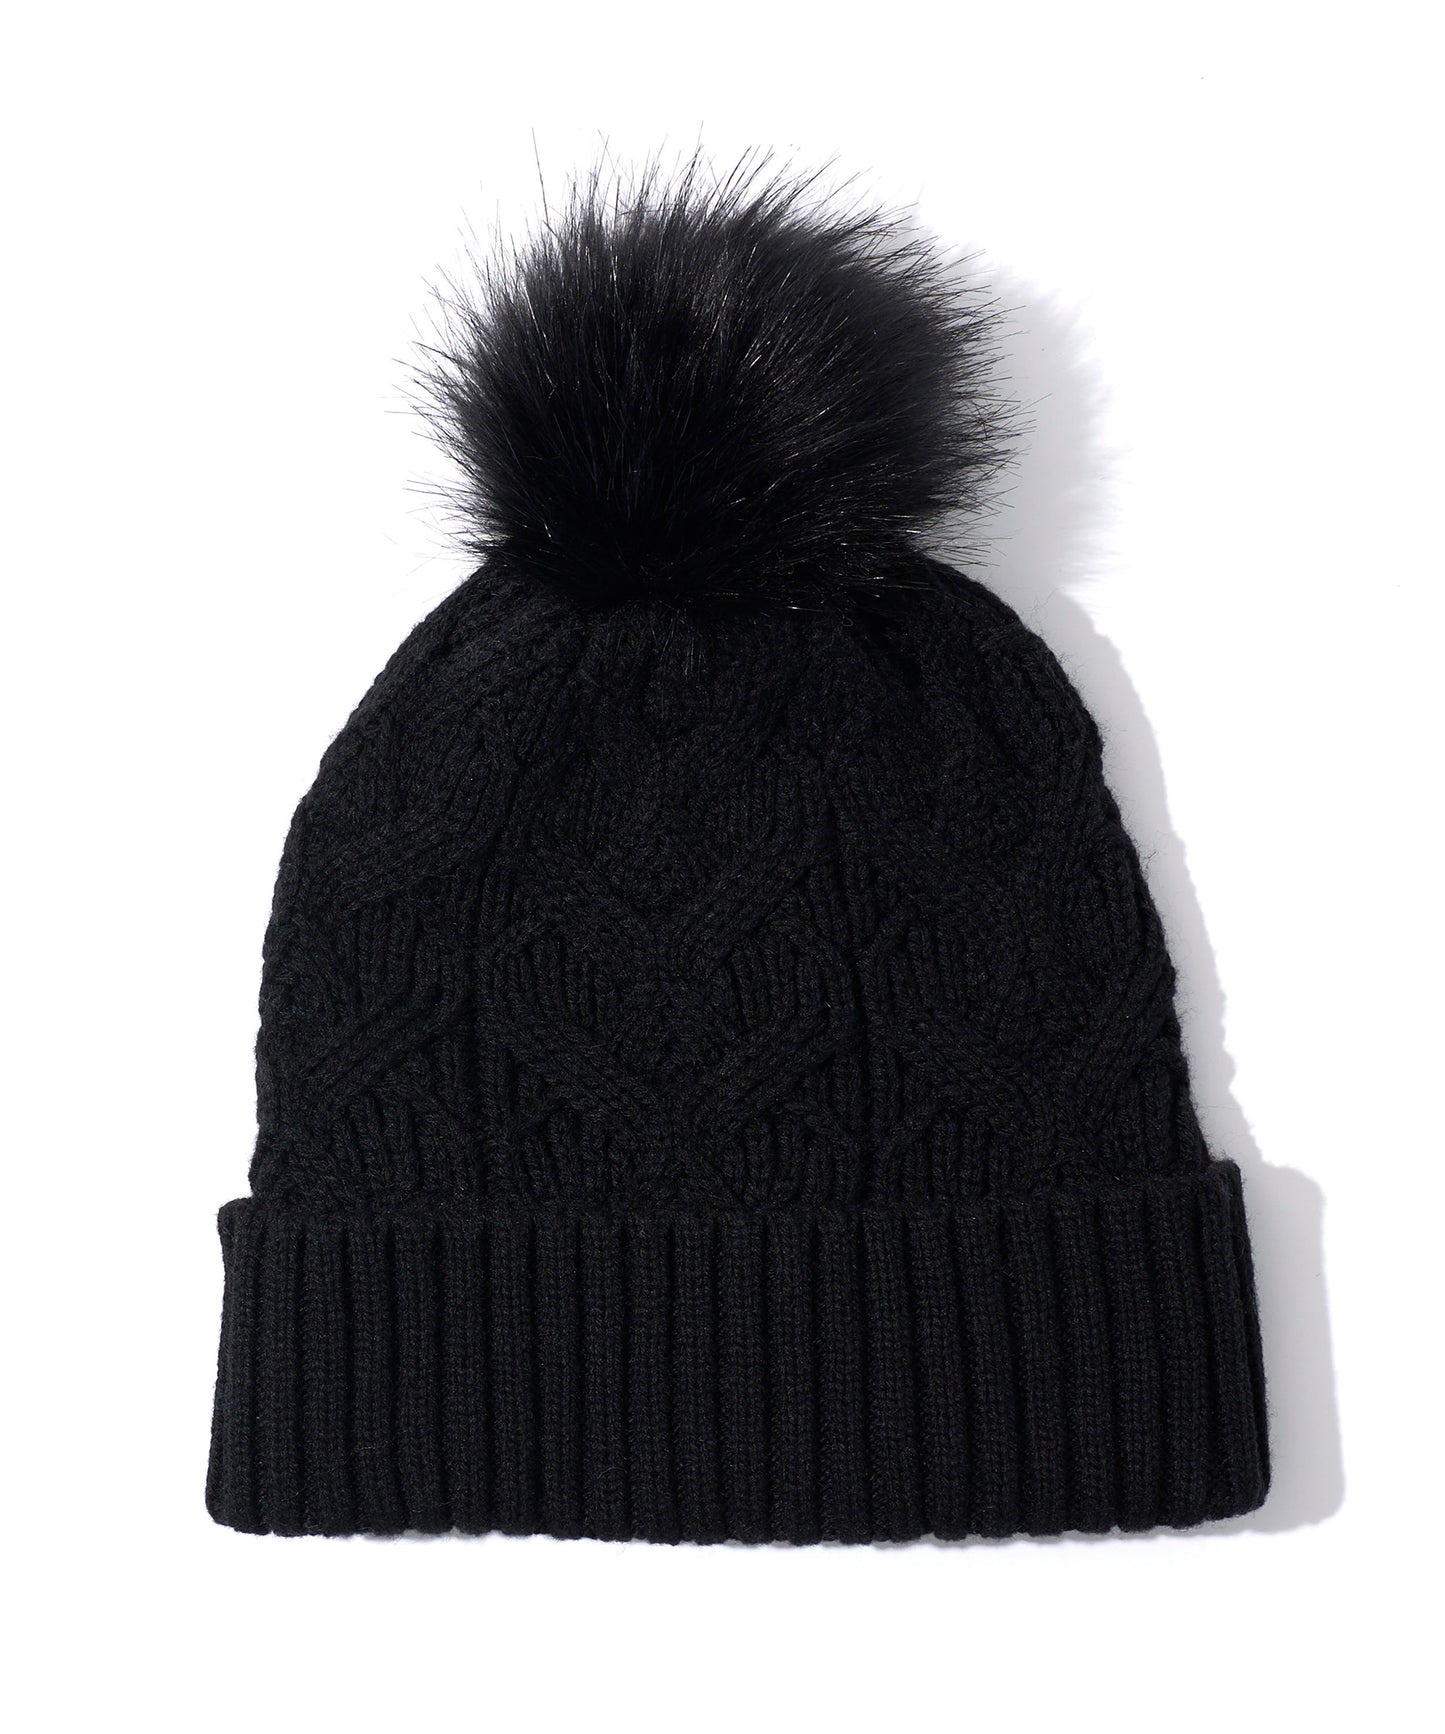 Loopy Cable Pom Hat in color Black